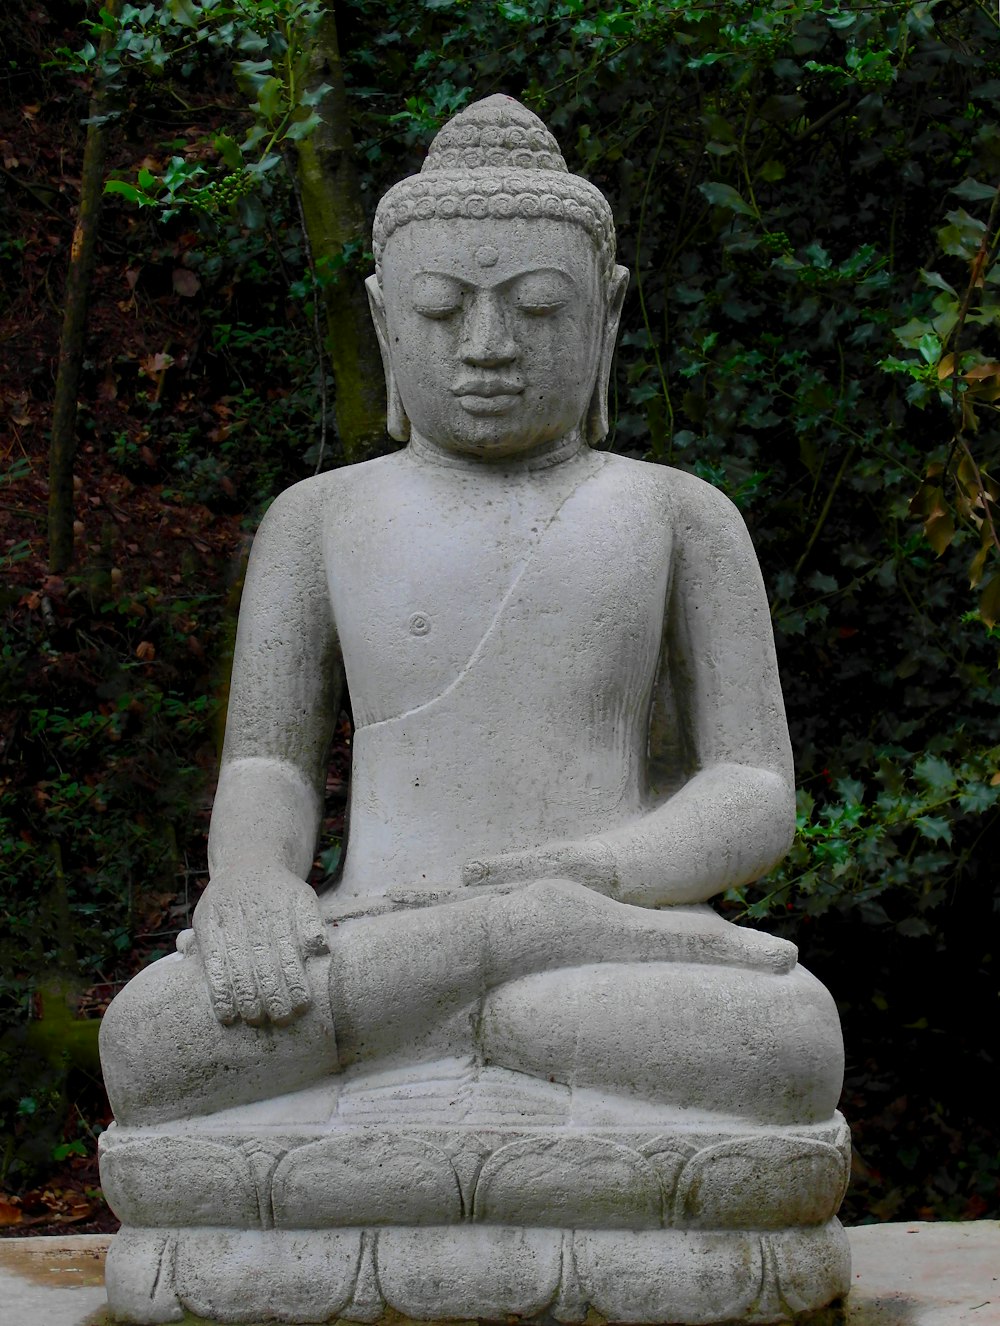 a statue of a buddha sitting in the middle of a forest